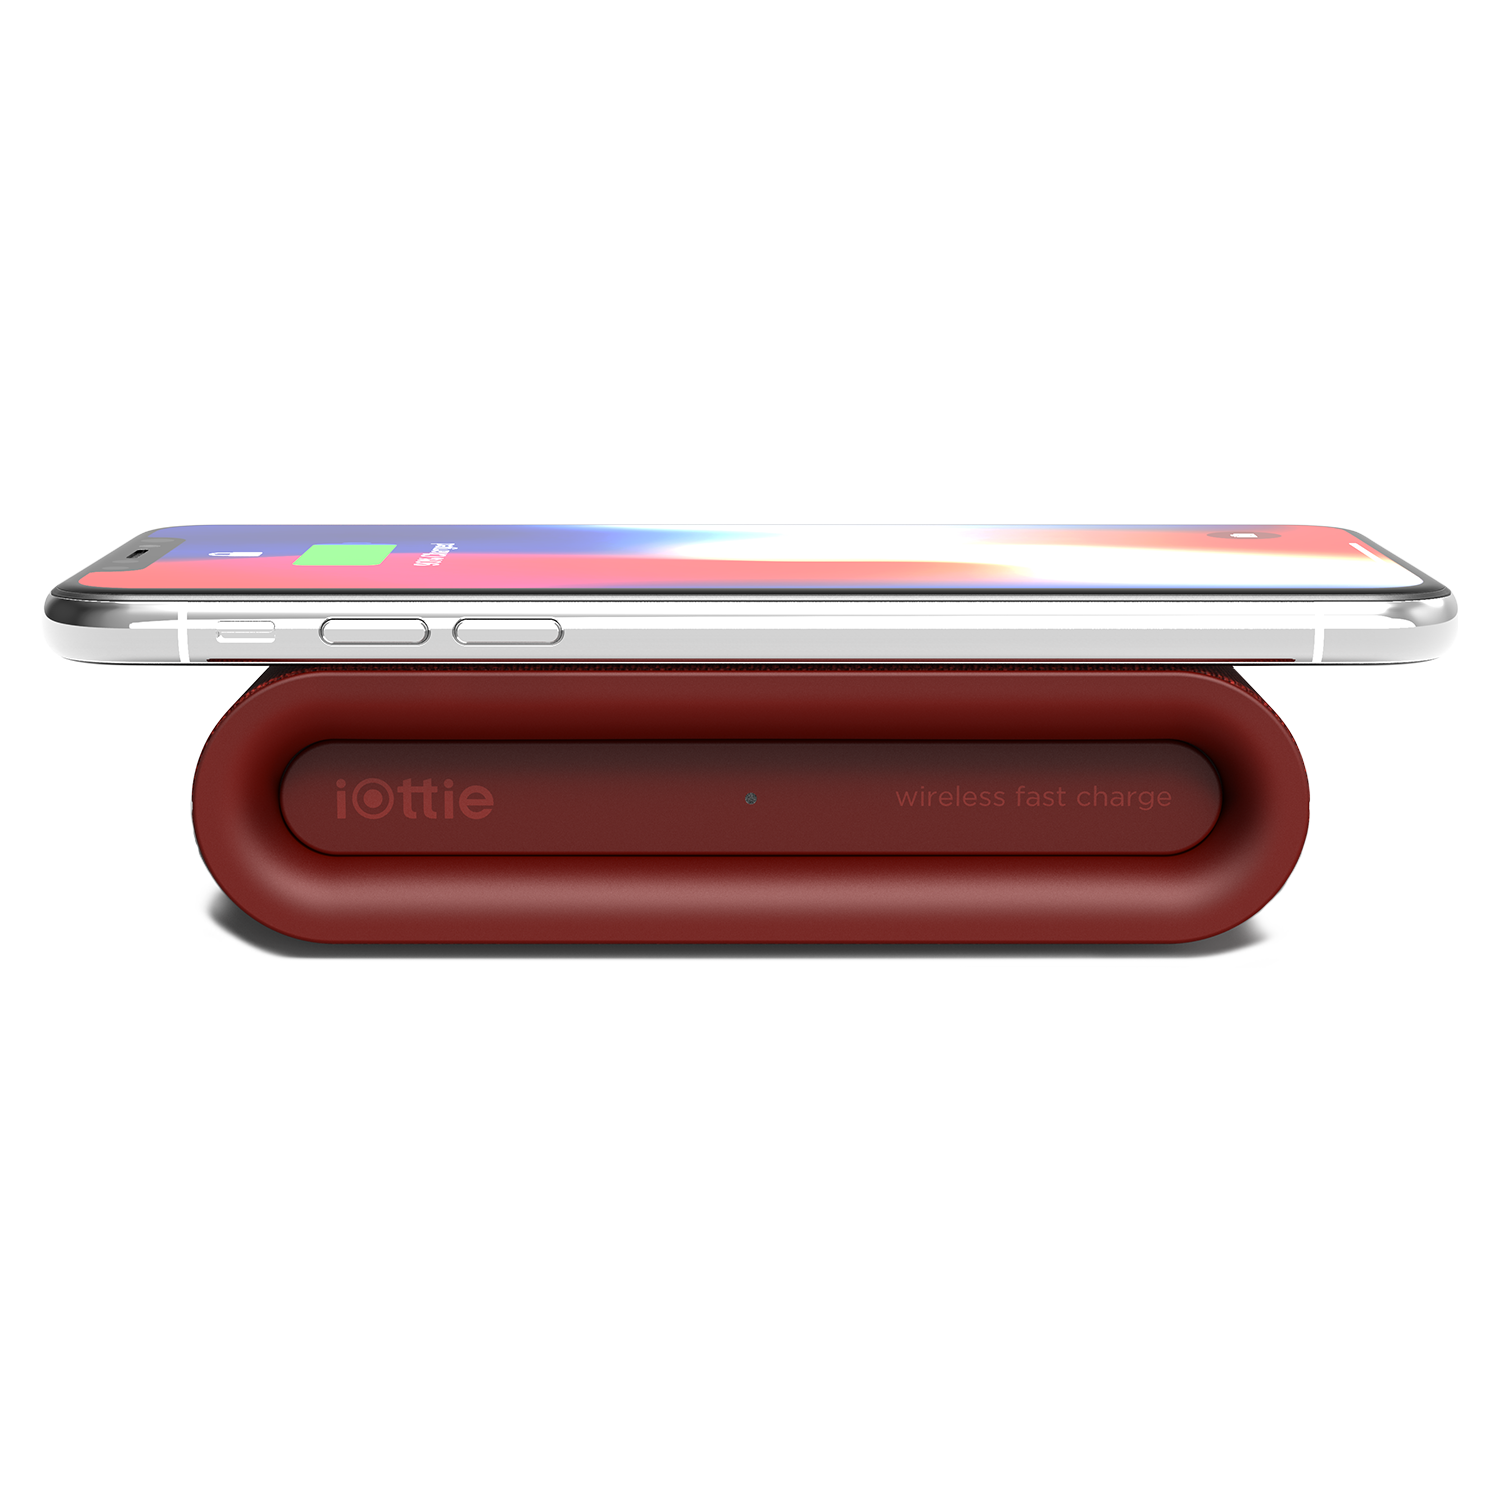 iPhone Wirelessly Fast Charging on the iON Plus in Ruby